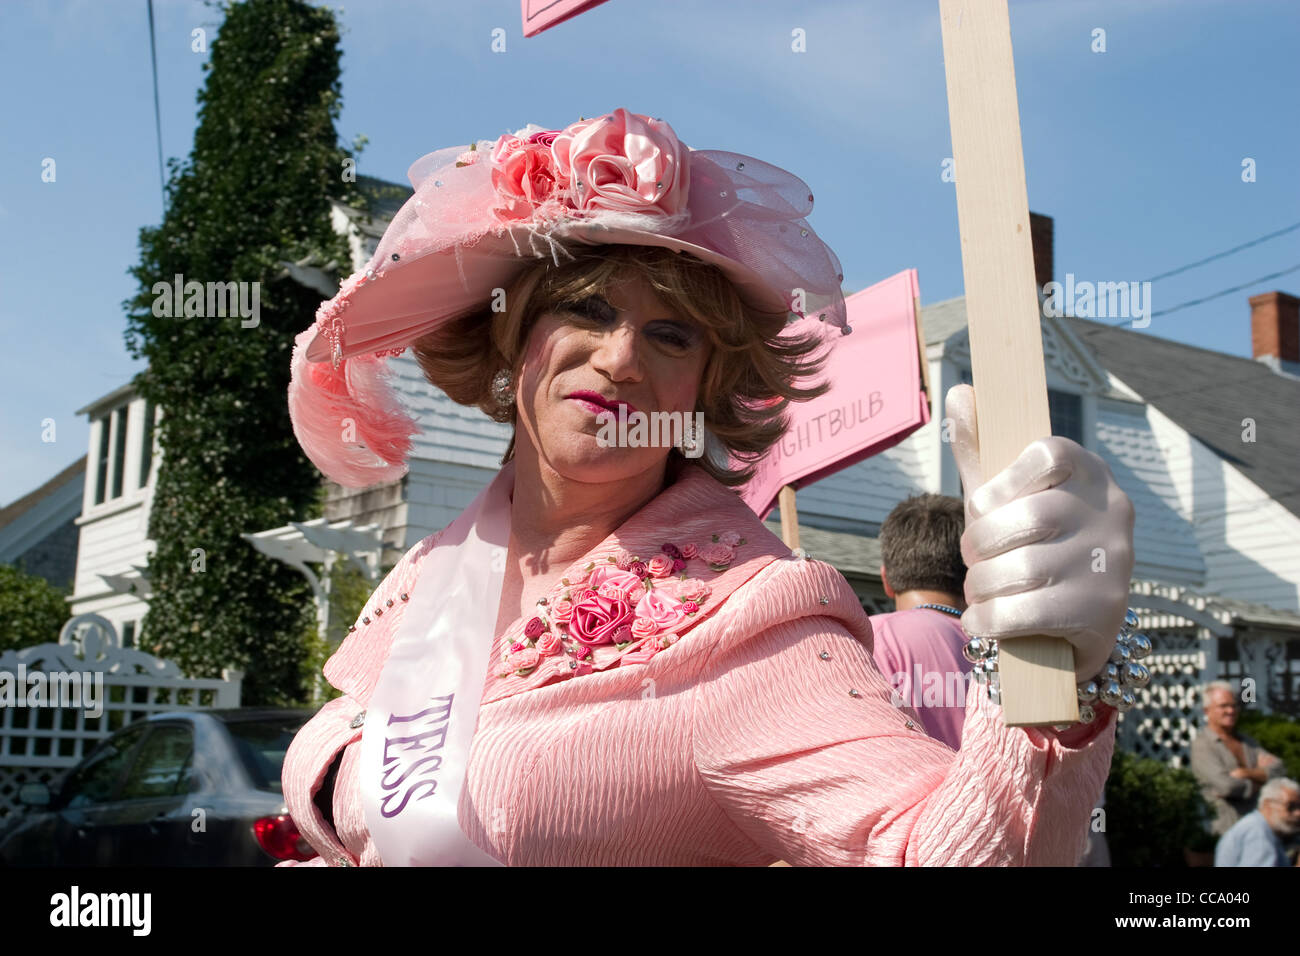 A Drag Queen parades down Commercial Street in Provincetown Carnival. Stock Photo